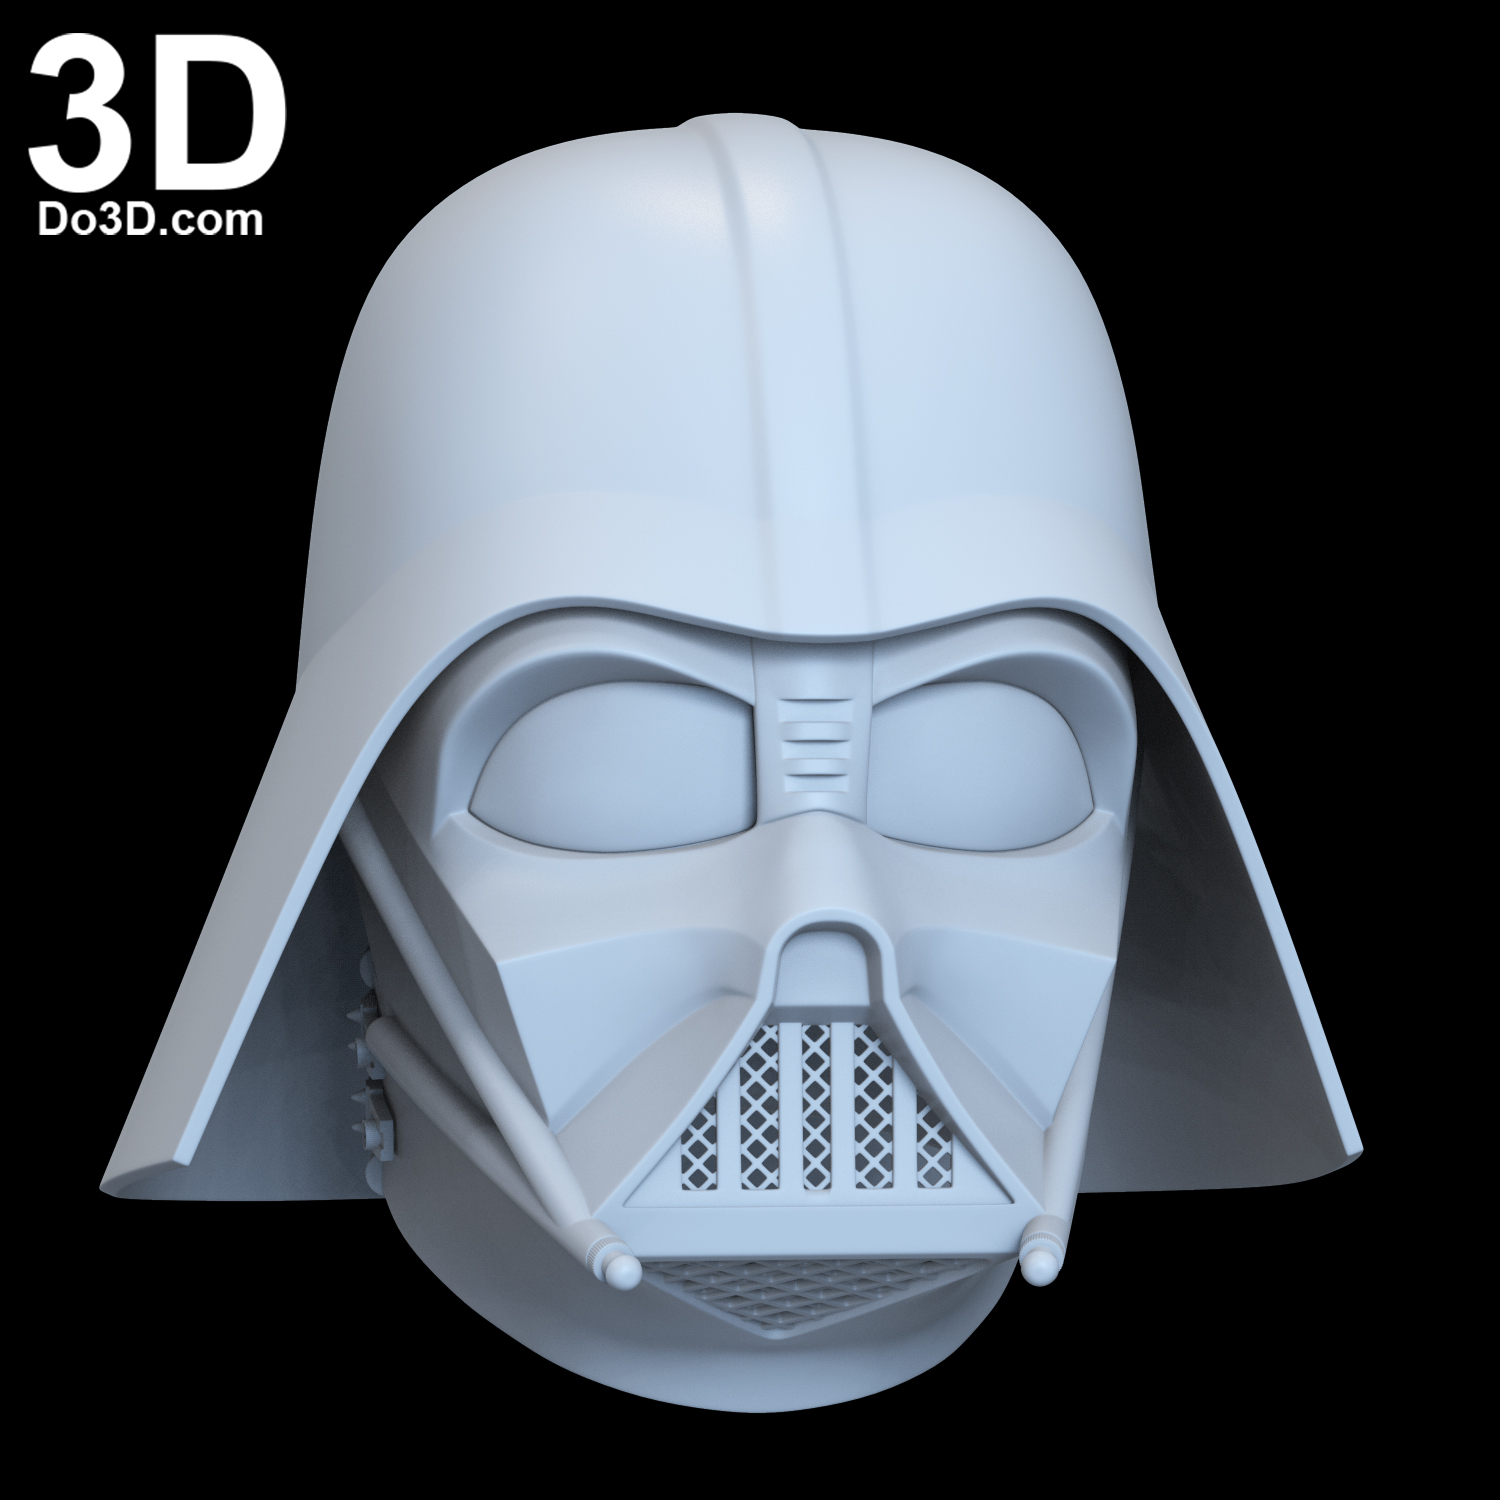 3D Printable Model: Darth Vader Star Wars Helmet with Dome and Neck ...